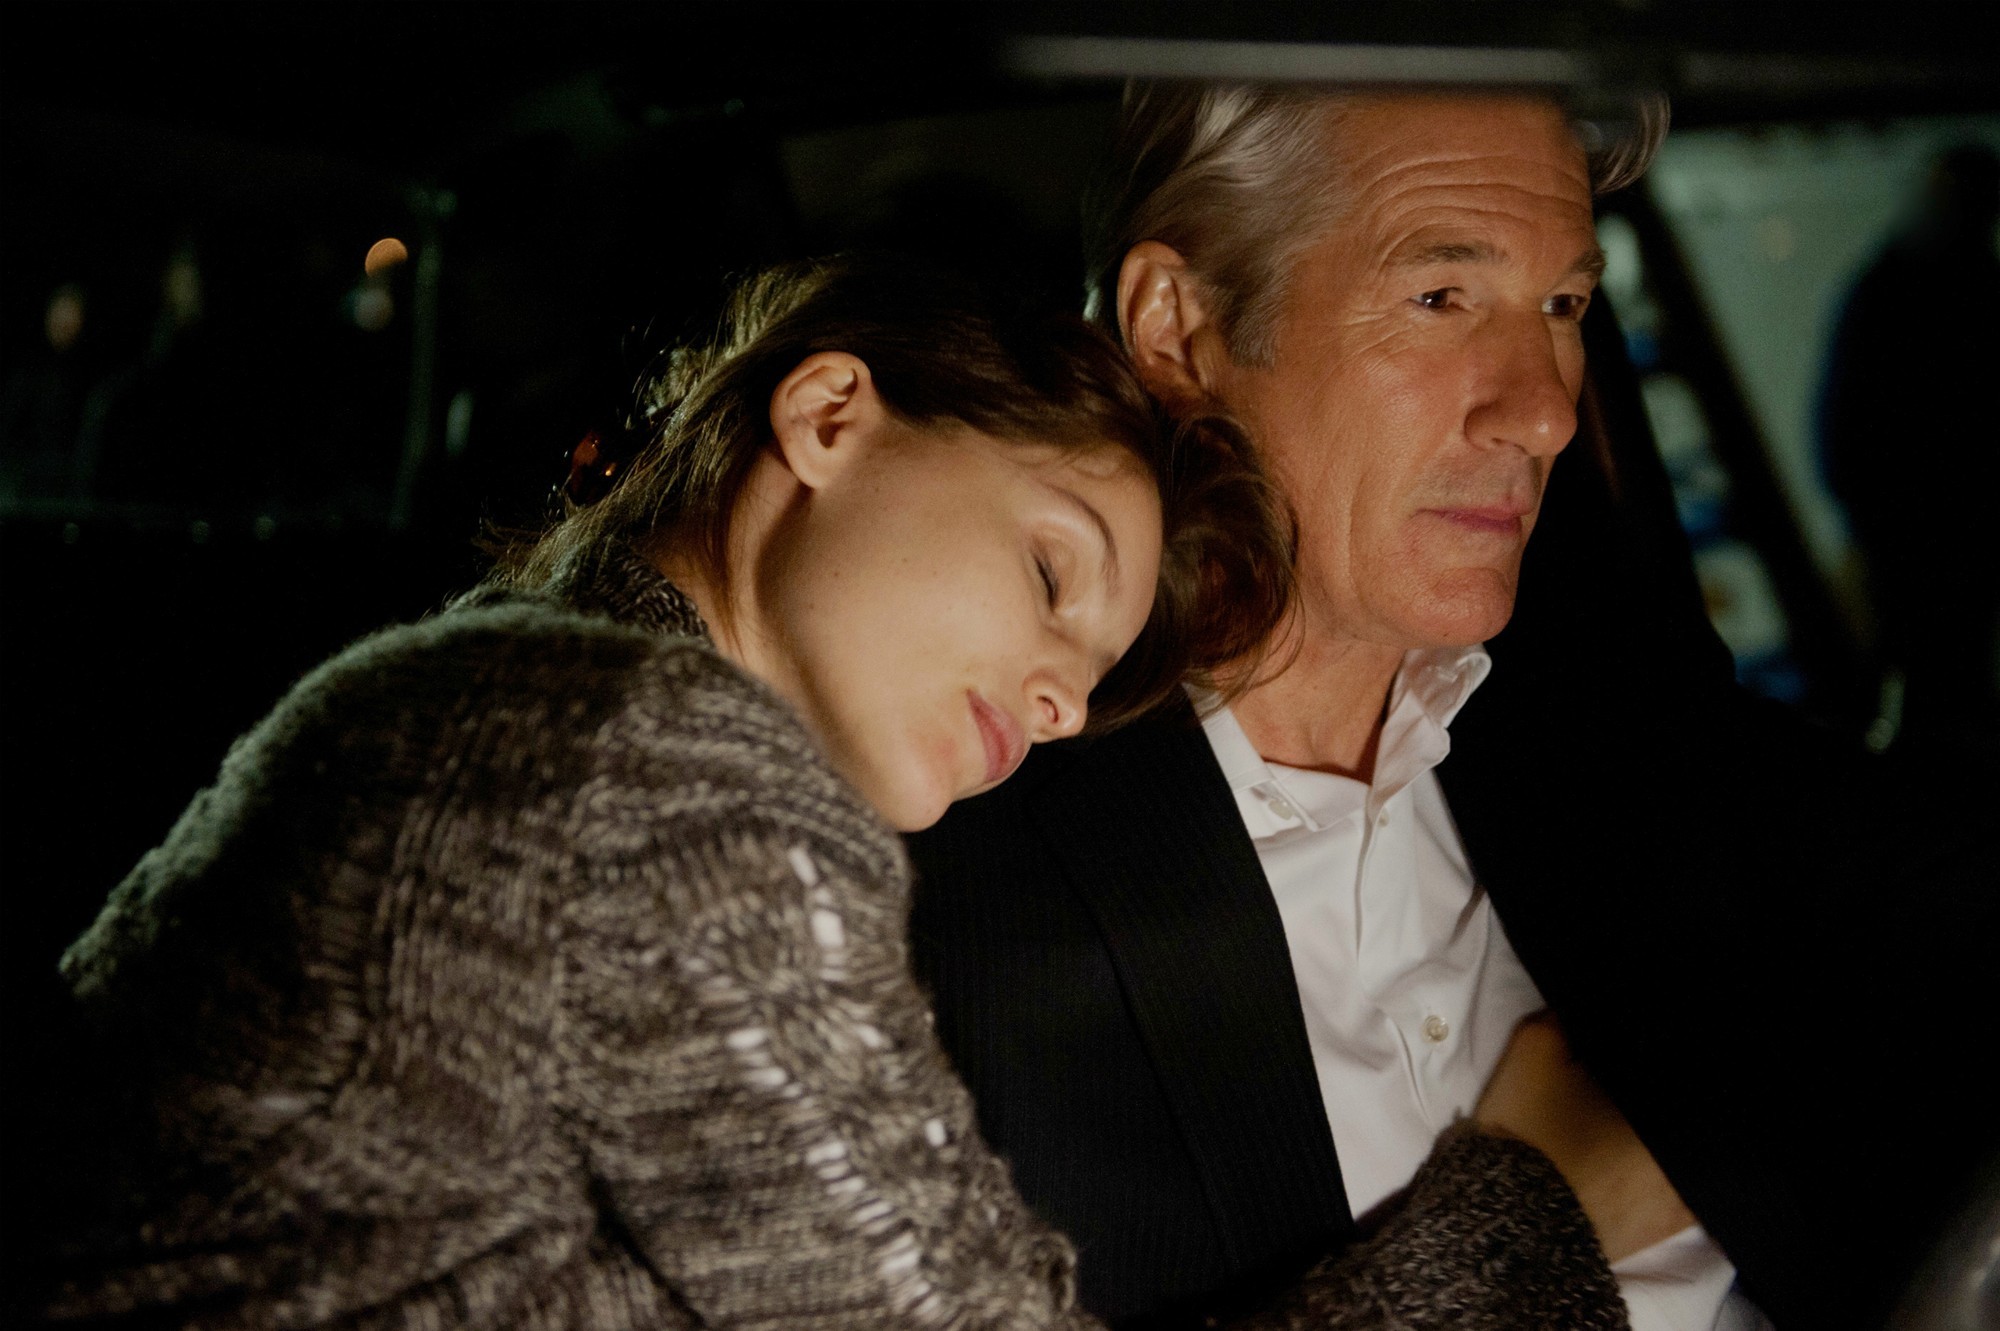 Laetitia Casta stars as Julie Cote and Richard Gere stars as Robert Miller in Roadside Attractions' Arbitrage (2012)